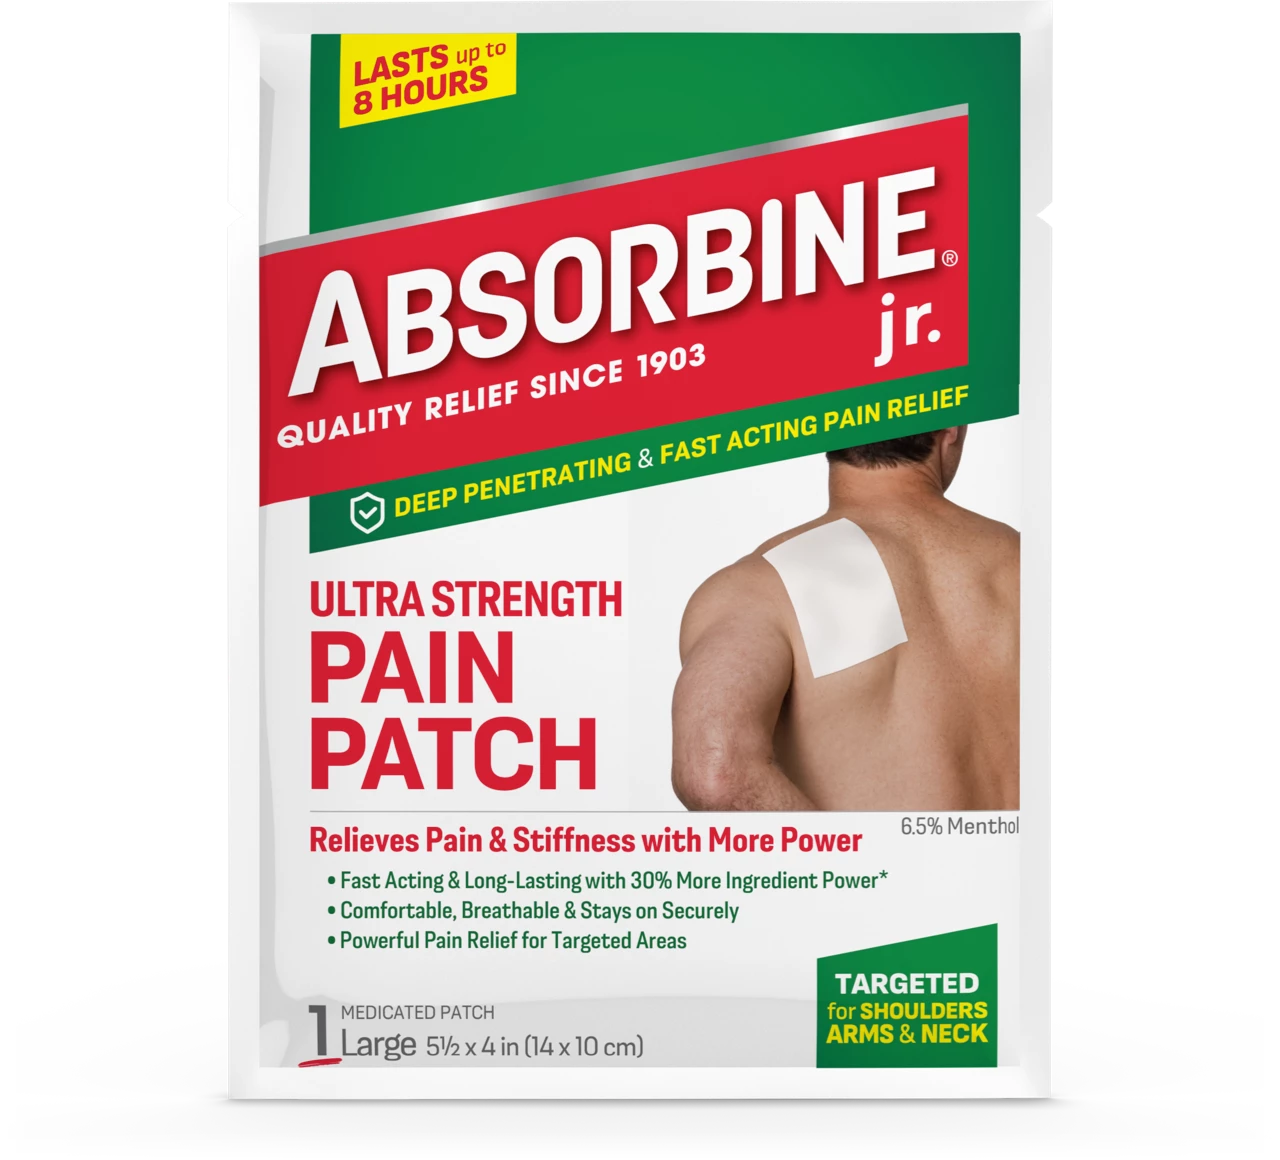 Mentholatum WellPatch Backache Extra Large Ultra Strength Pain Relief Patch